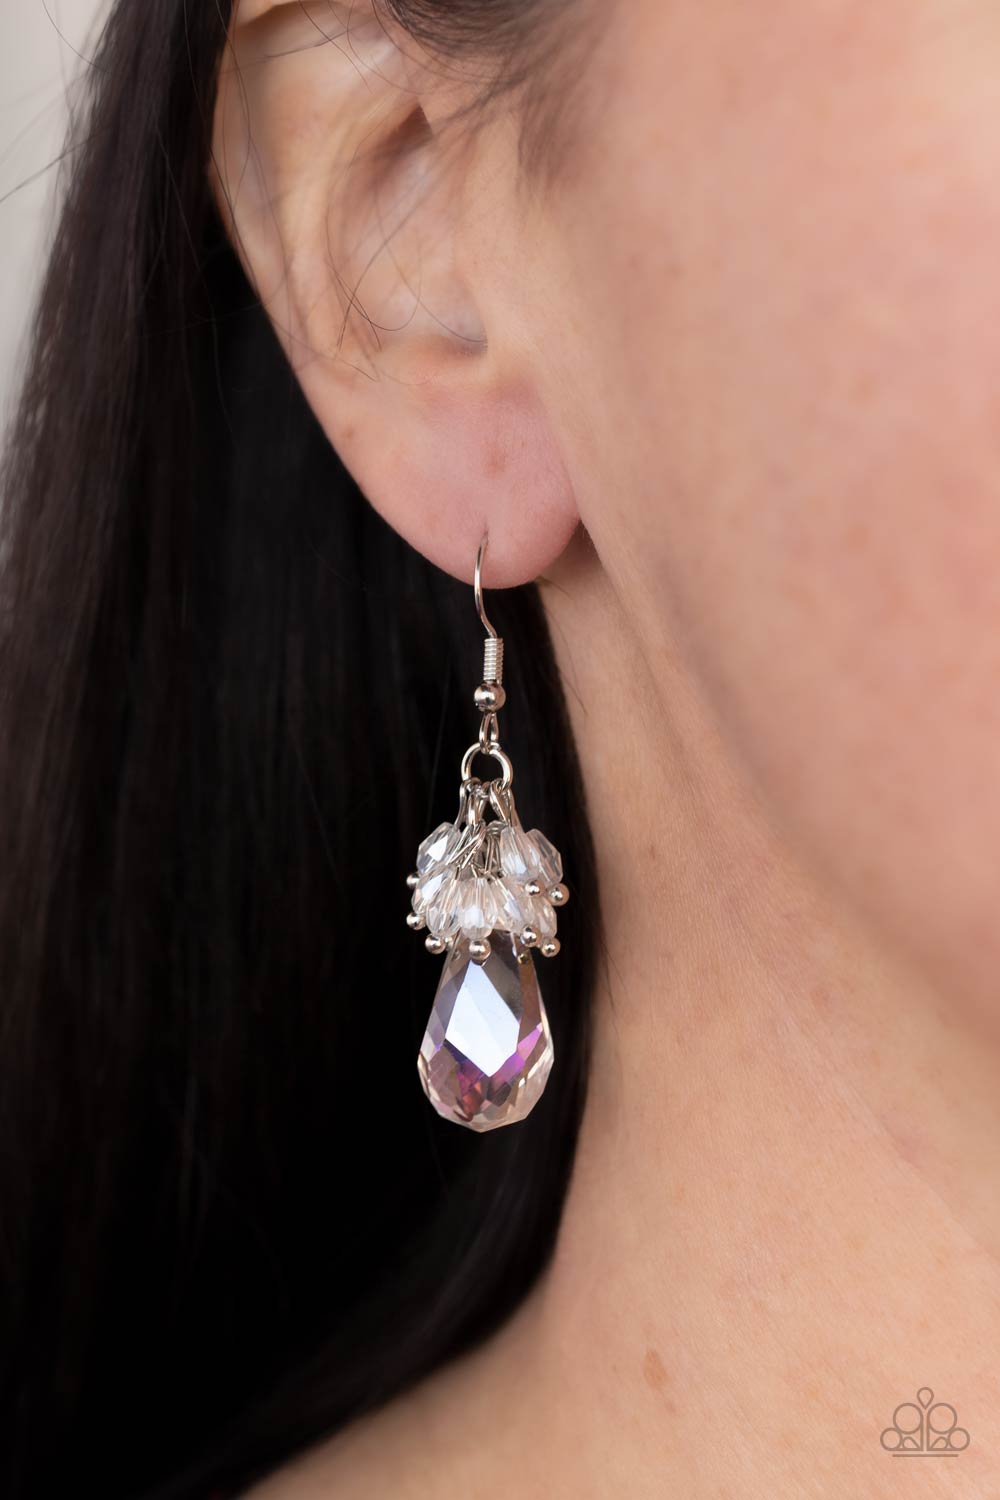 Paparazzi Accessories Well Versedin Sparkle - White Earrings - Lady T Accessories